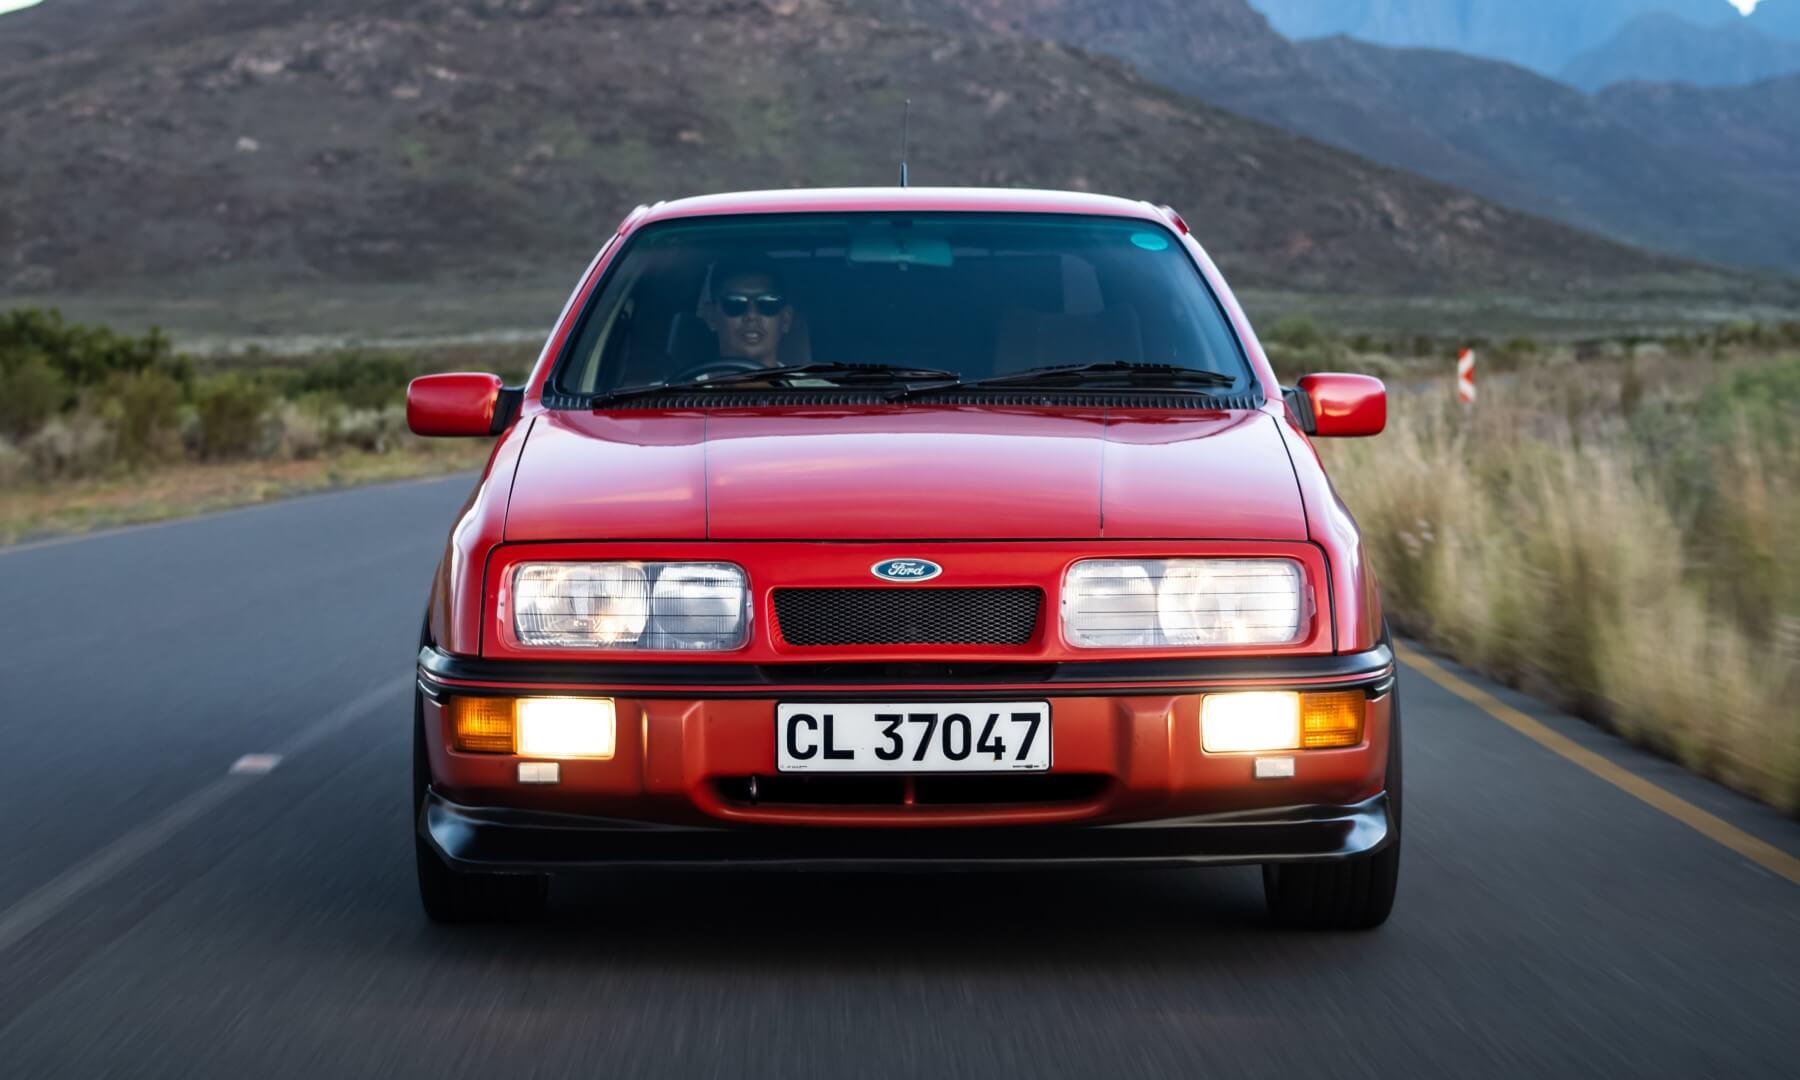 1984 Ford Sierra 2,3 GLE front